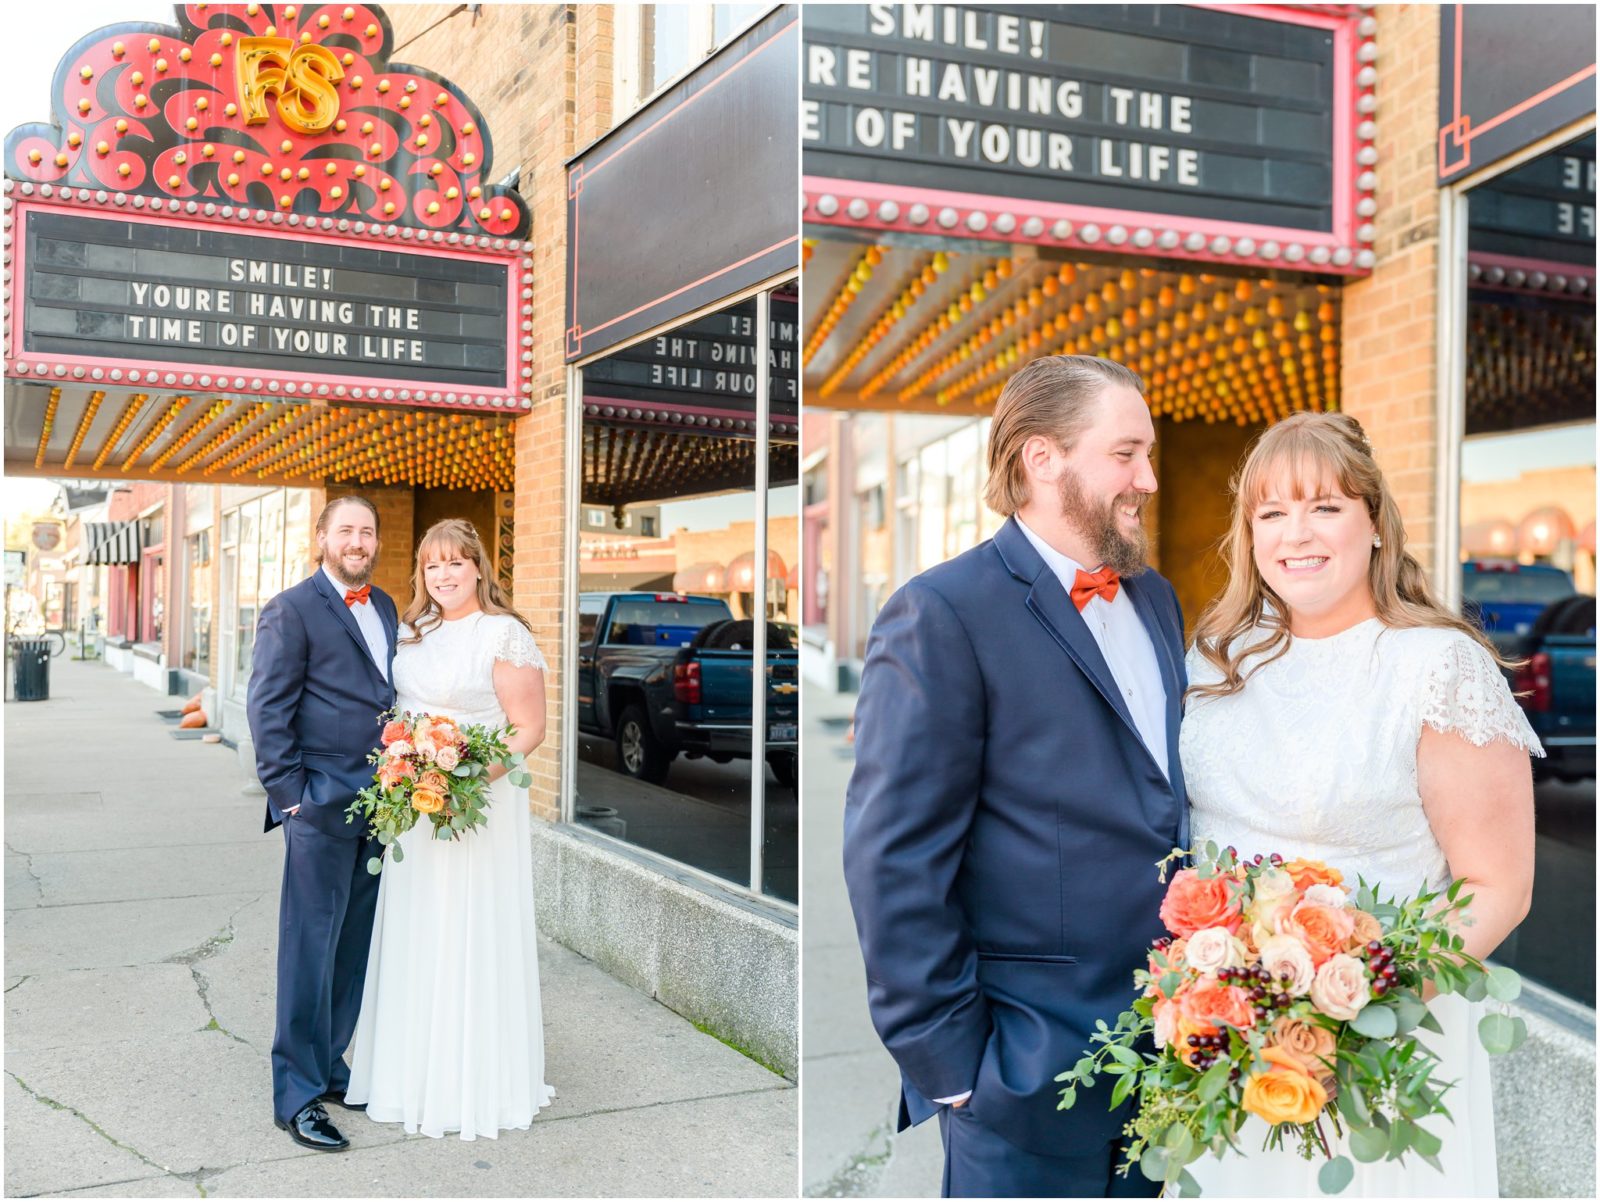 Bride and groom smiling at camera Fountain Square Theatre wedding